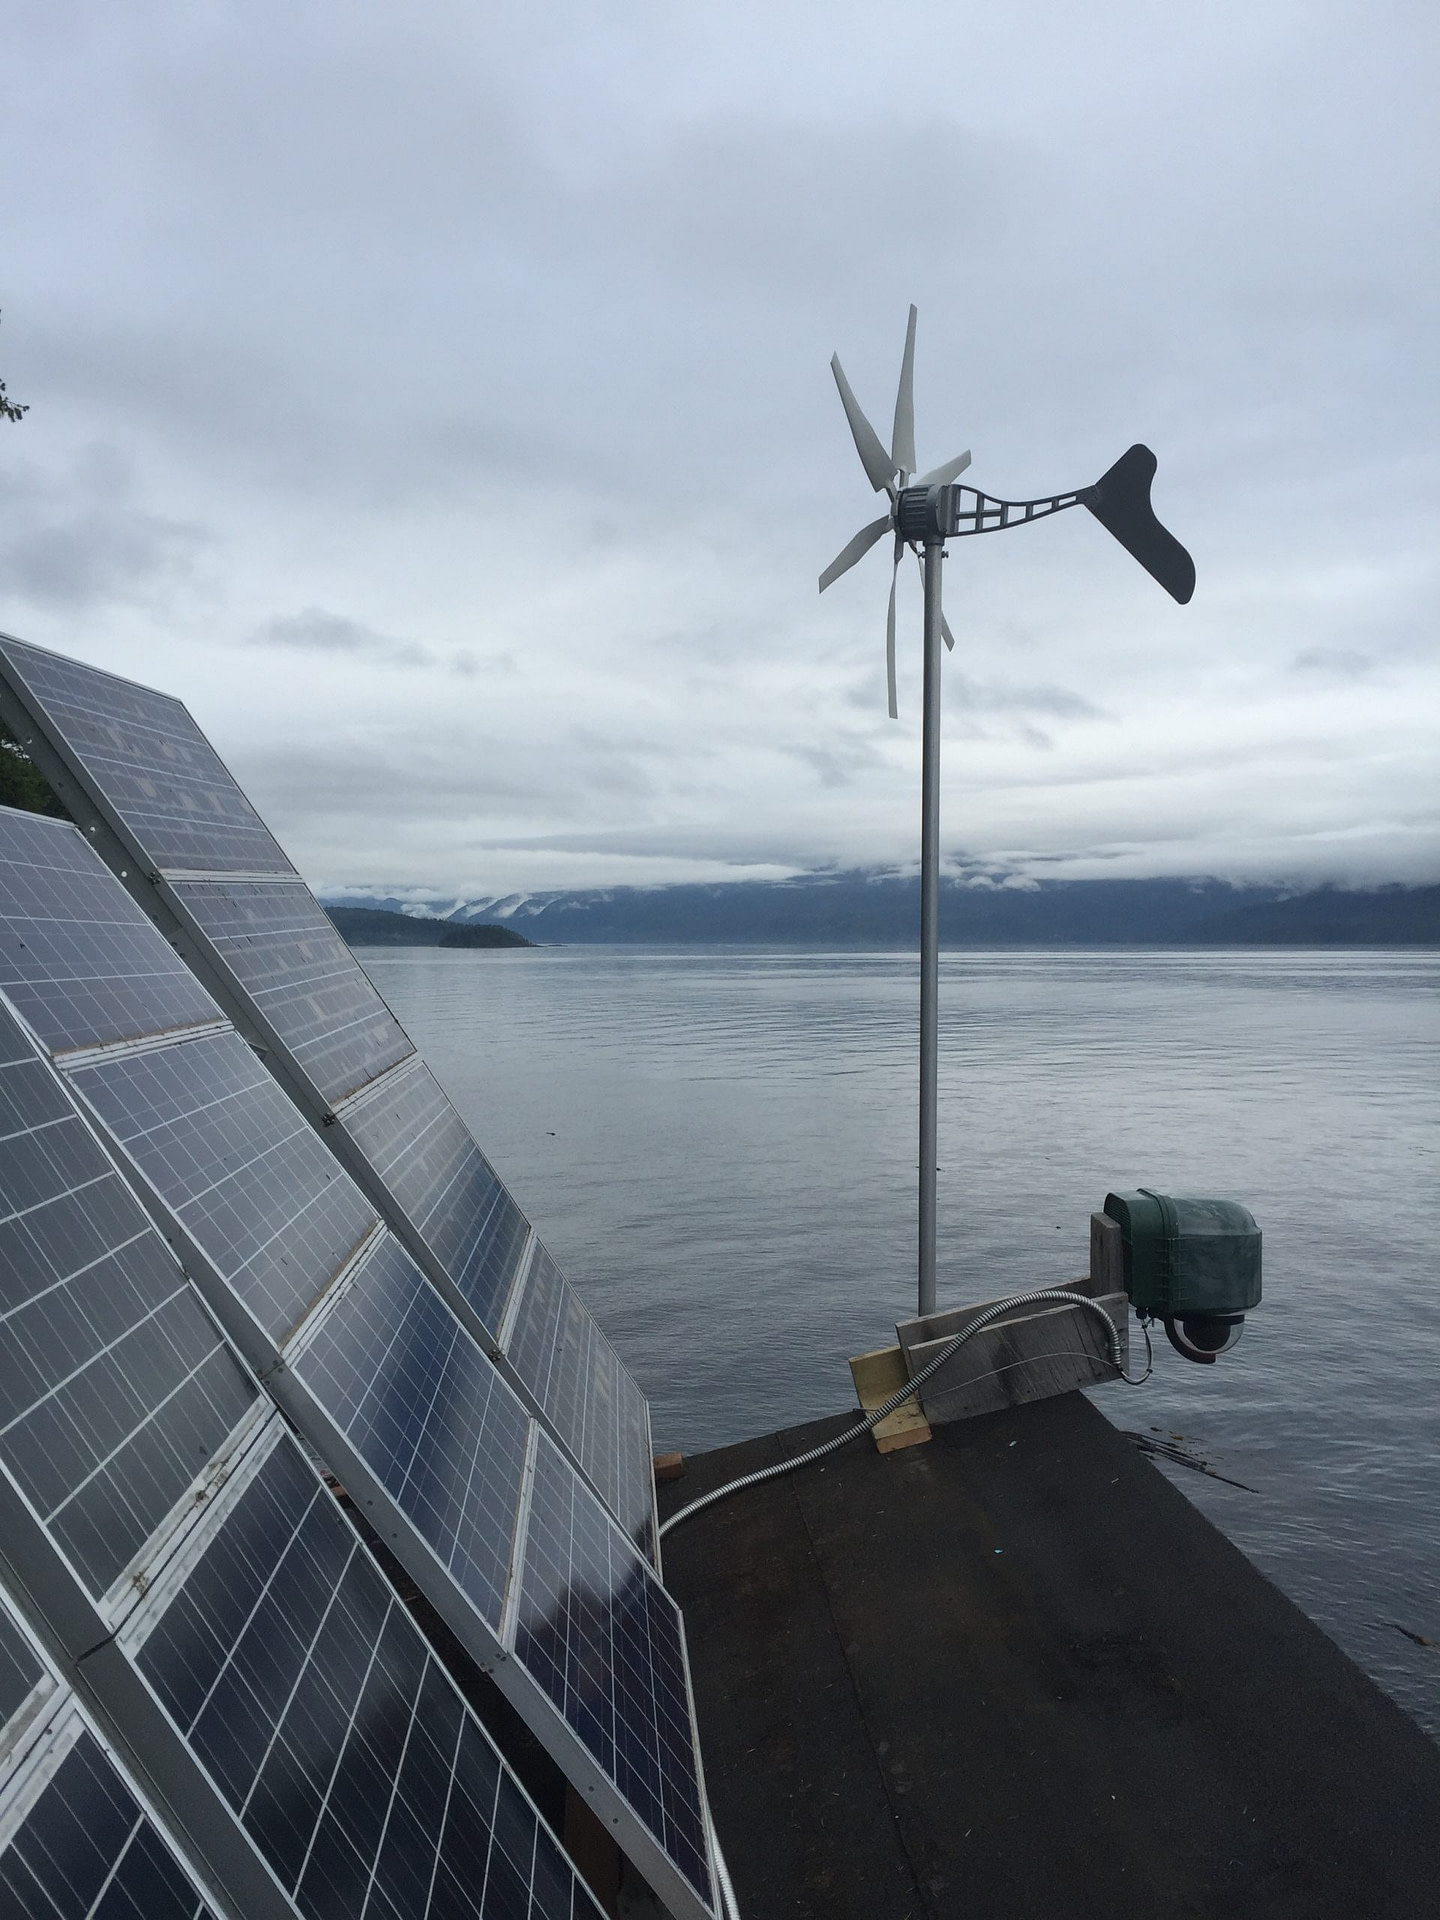 XRain Self Wiping Camera Enclosure System Installed At Cracroft Point Overlooking Resident Orcas In Johnstone Strait In British Columbia Canada 